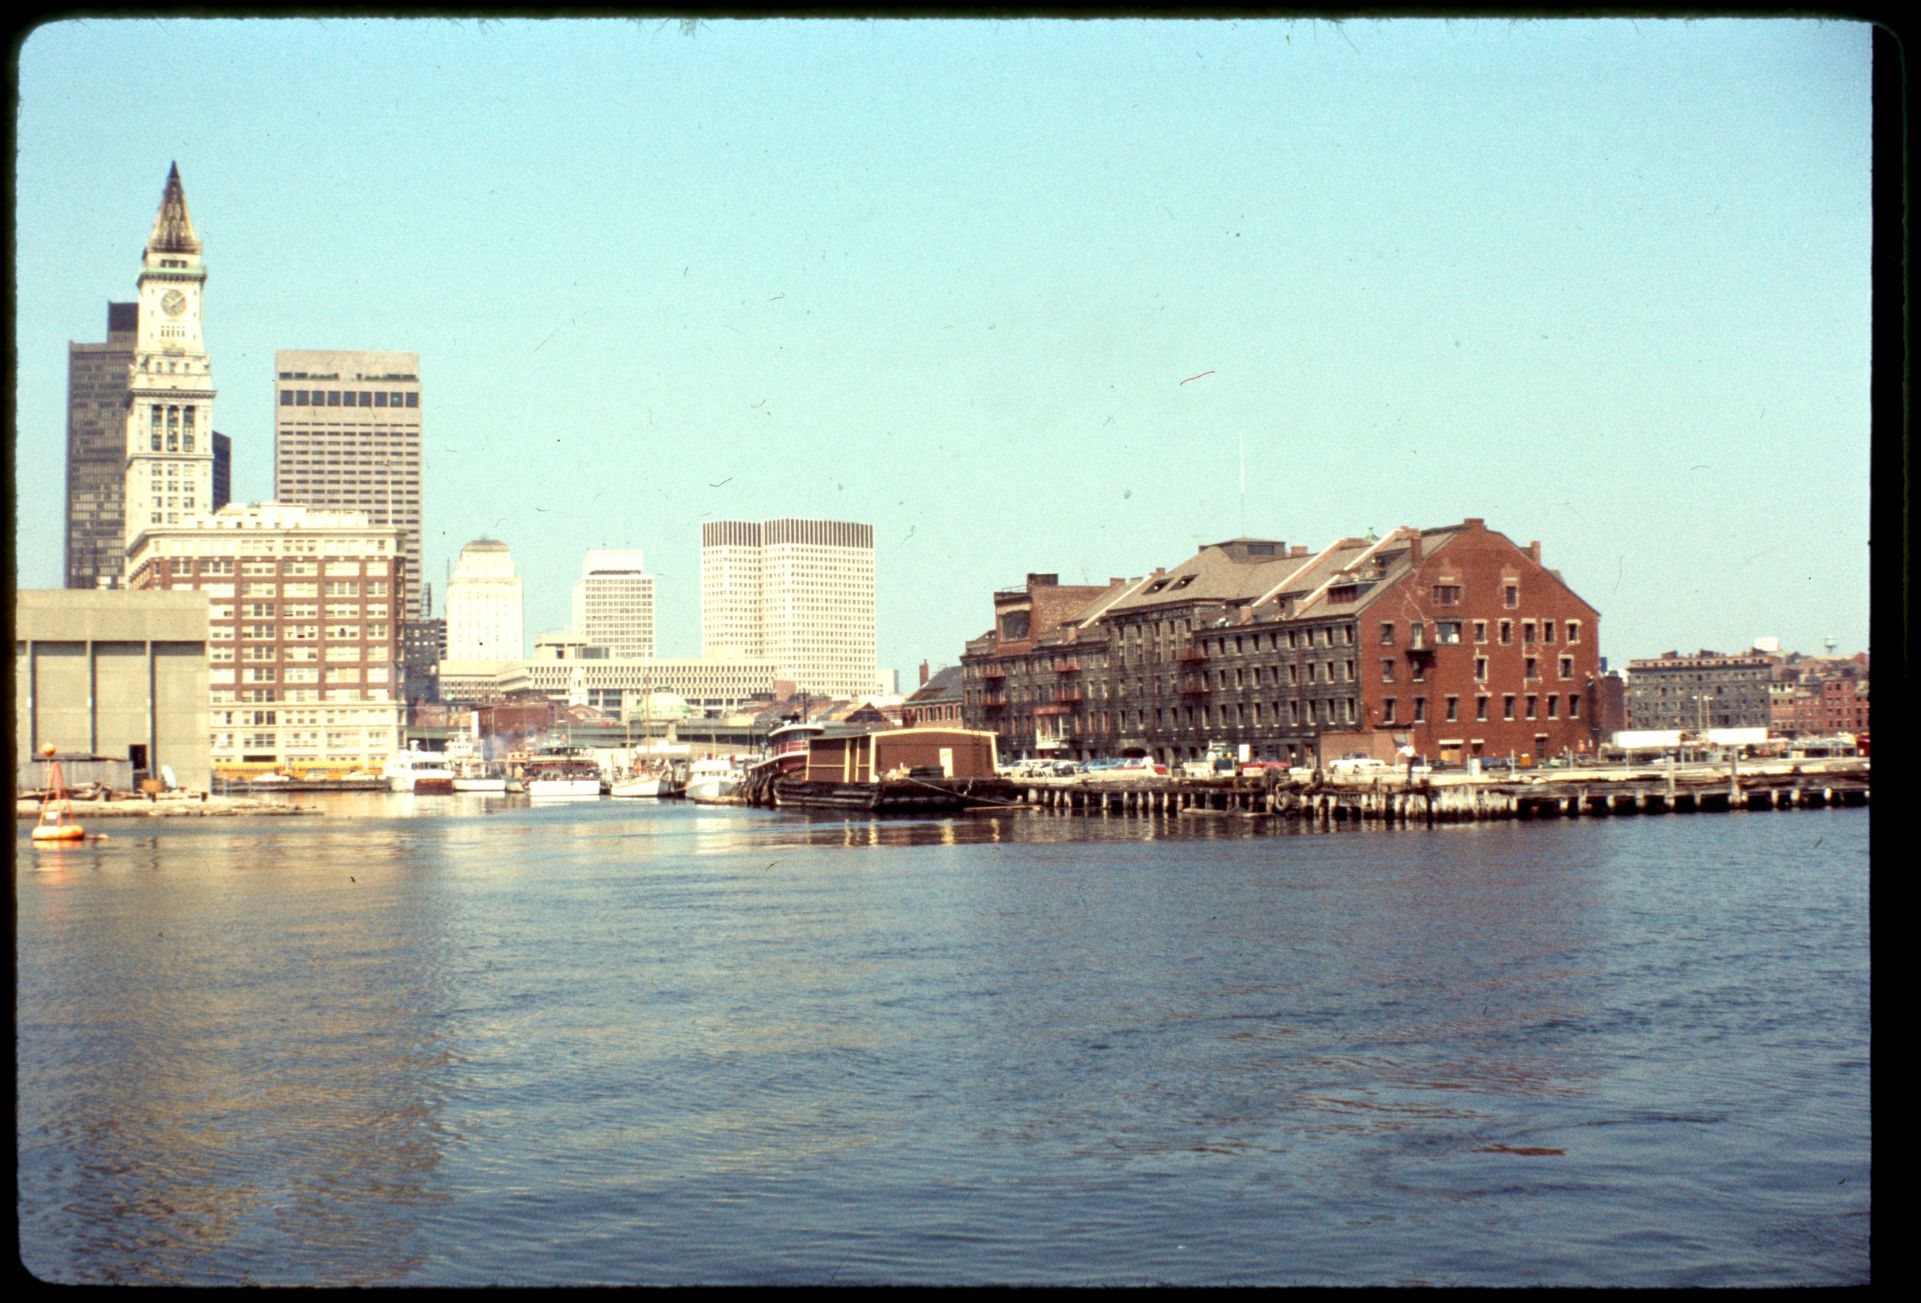 1973 photograph of Long Wharf, with Chart House visible across from the Custom House Tower and the newly built New England Aquarium